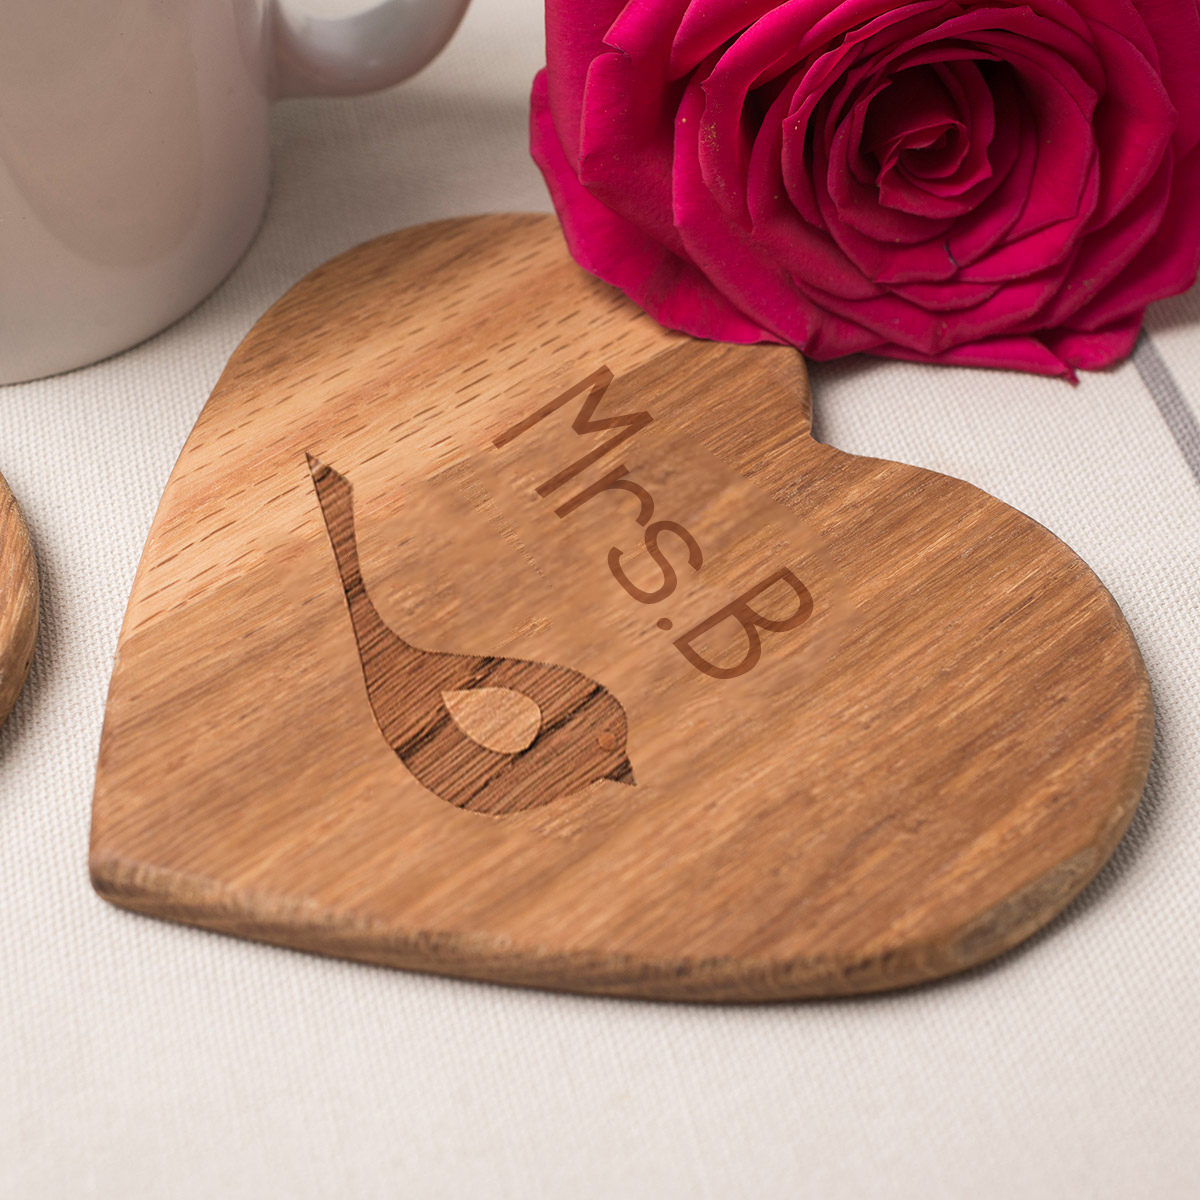 Personalised Set Of 2 Wooden Heart Coasters - Love Birds